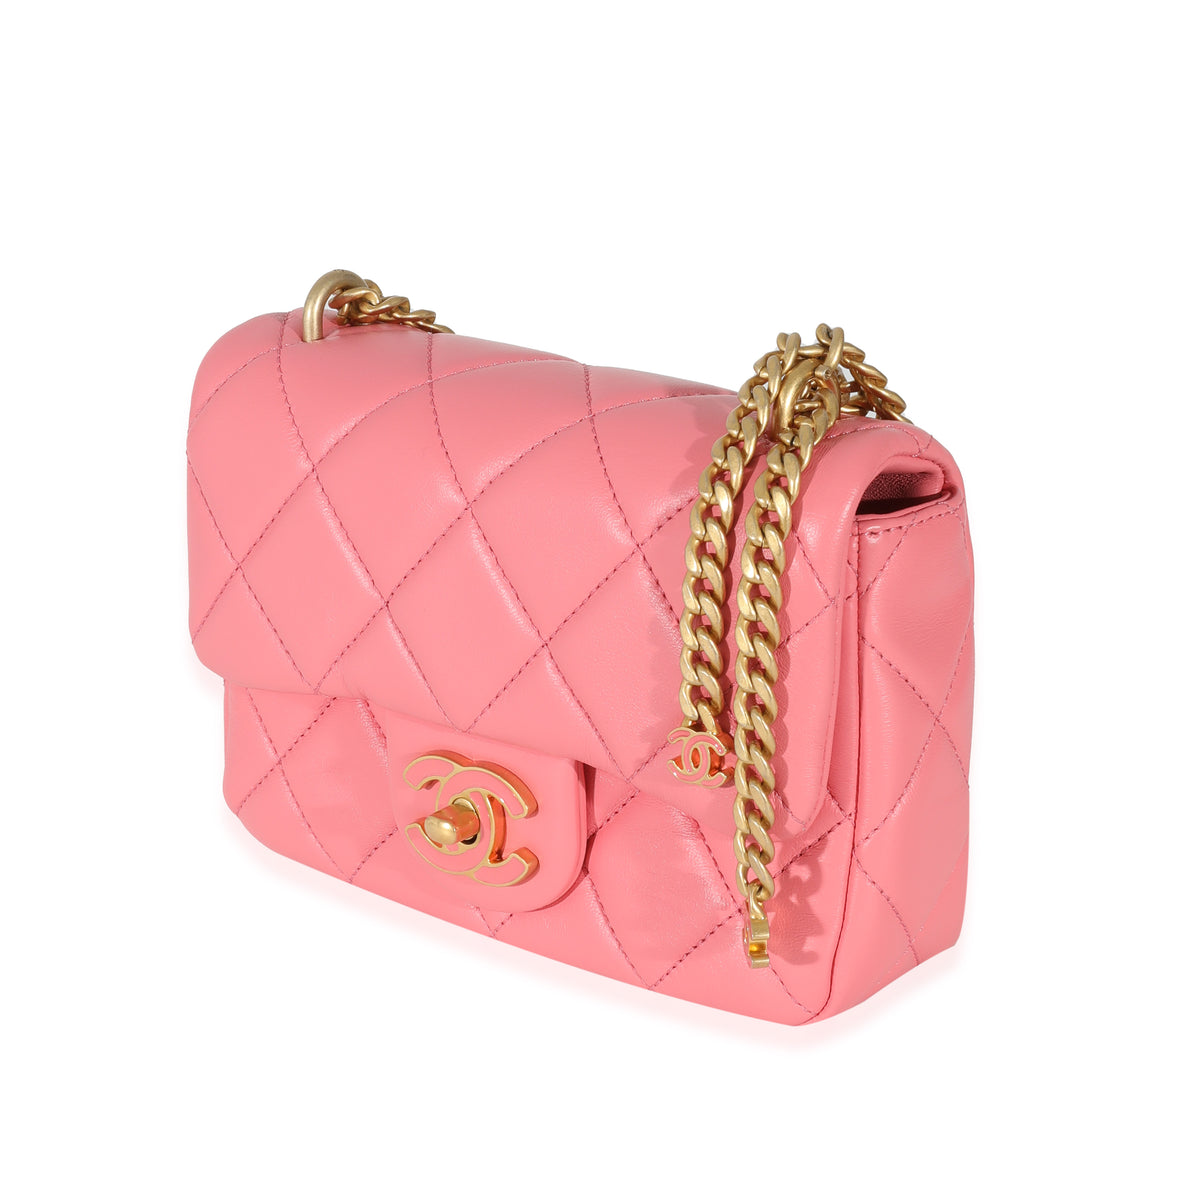 chanel 22p pink